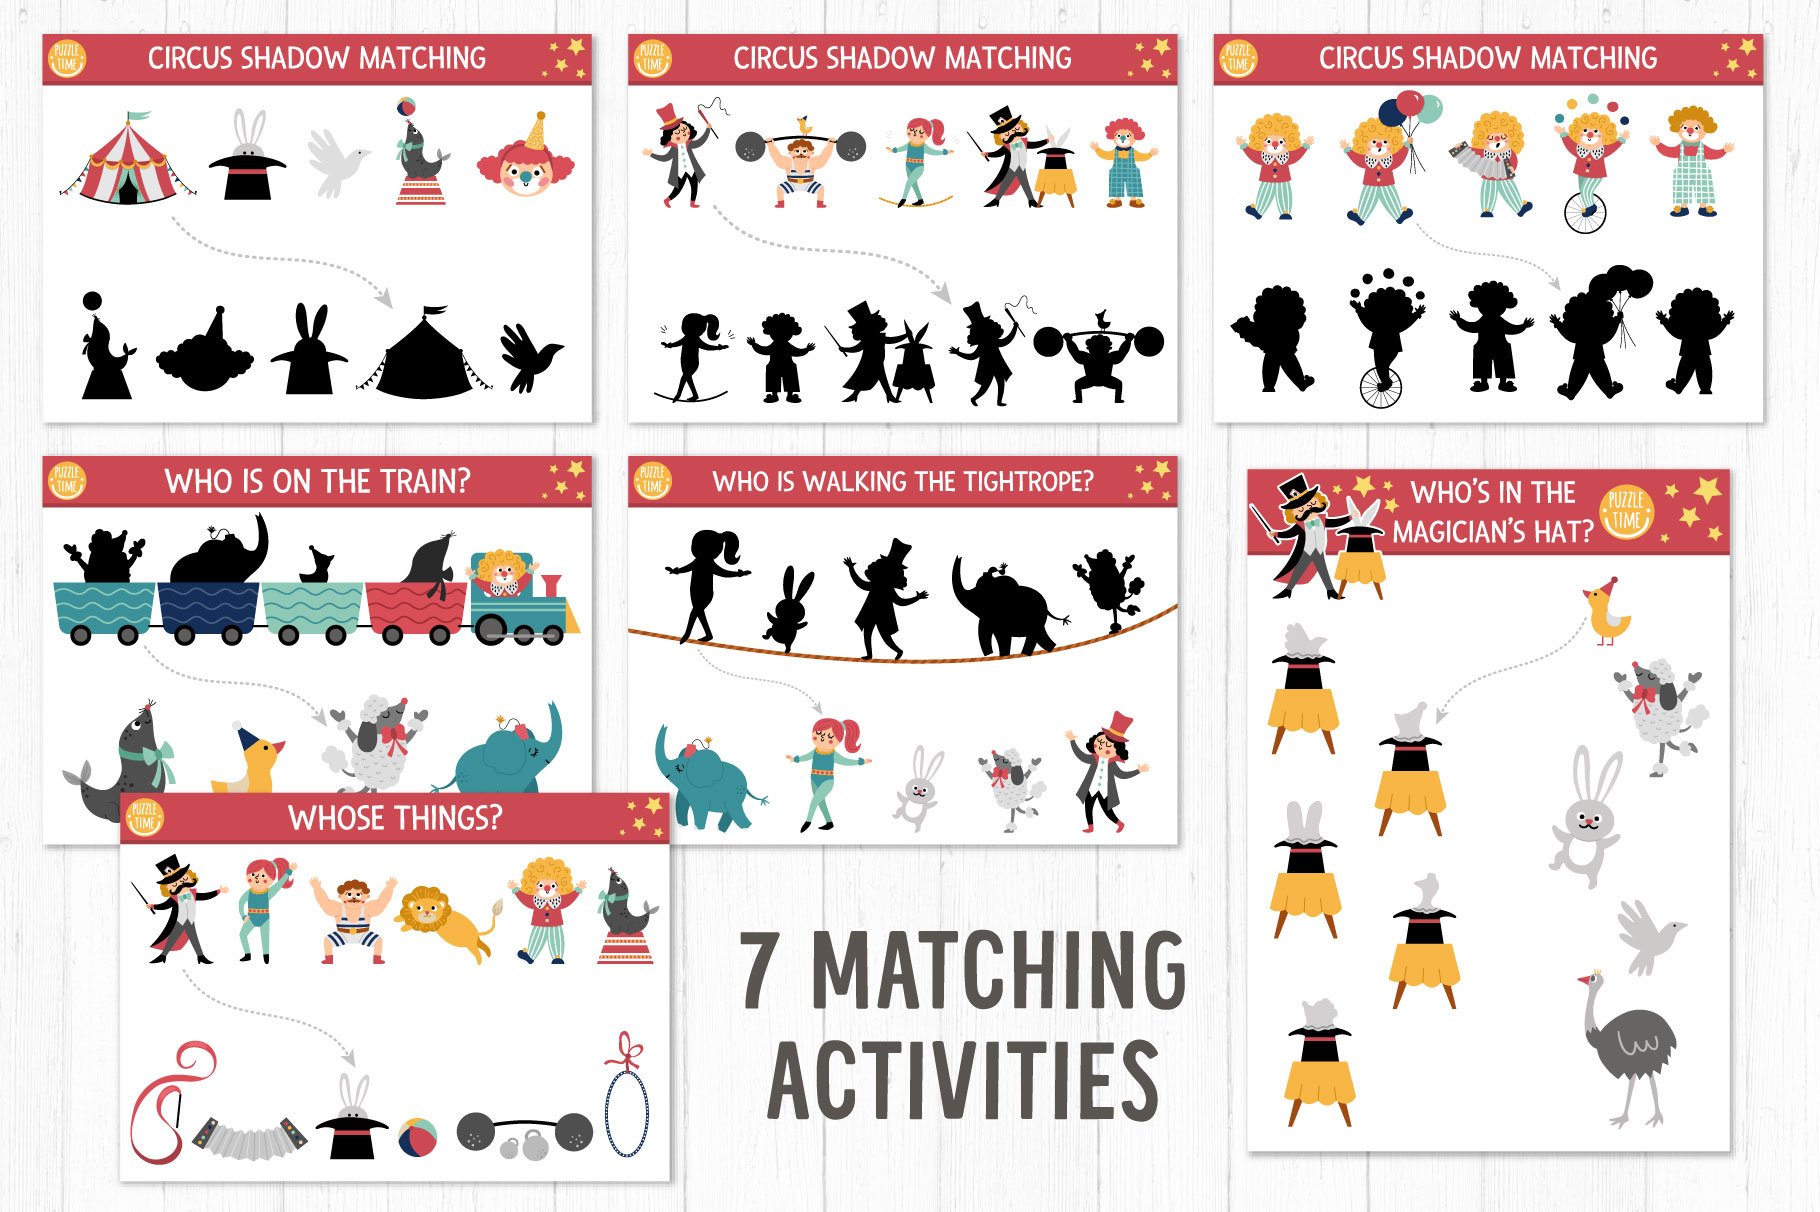 Matching activities preview.